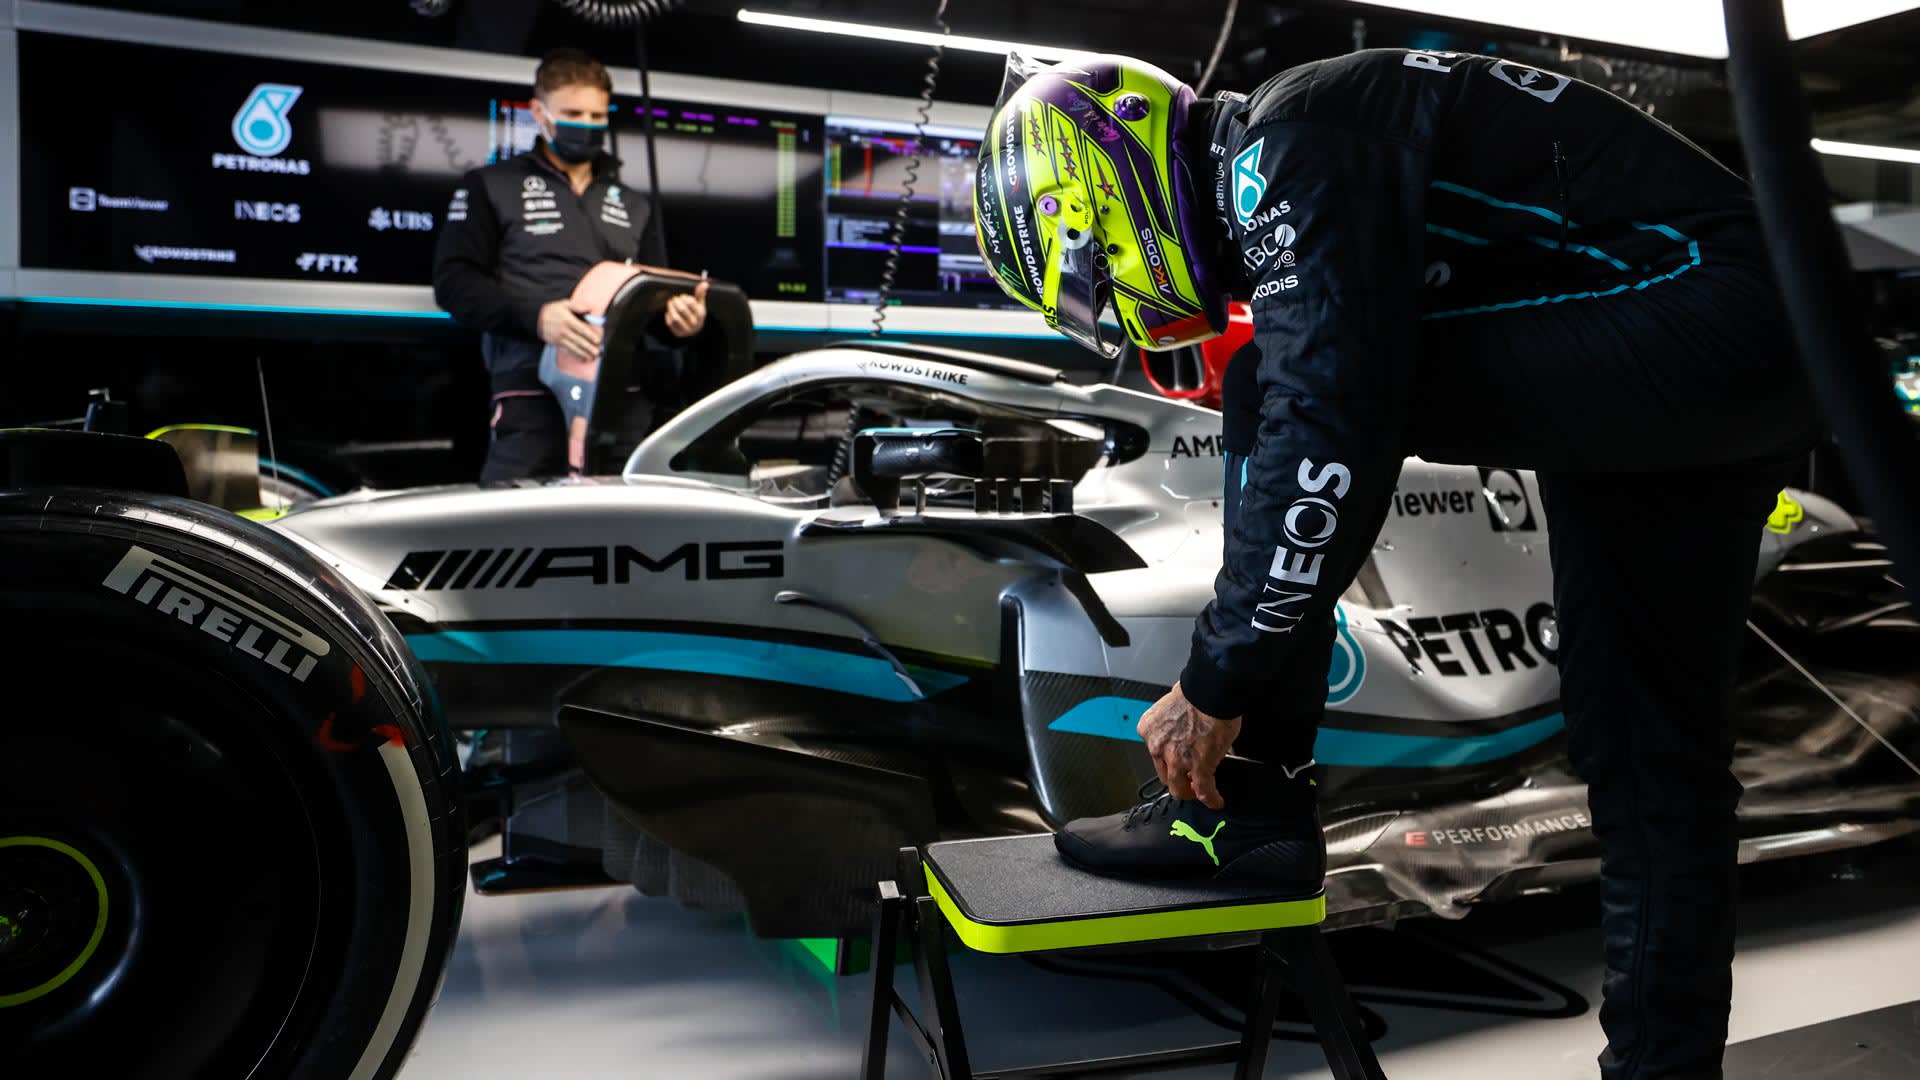 Mercedes Not Yet Ready to Pull Plug on 2022 F1 Car